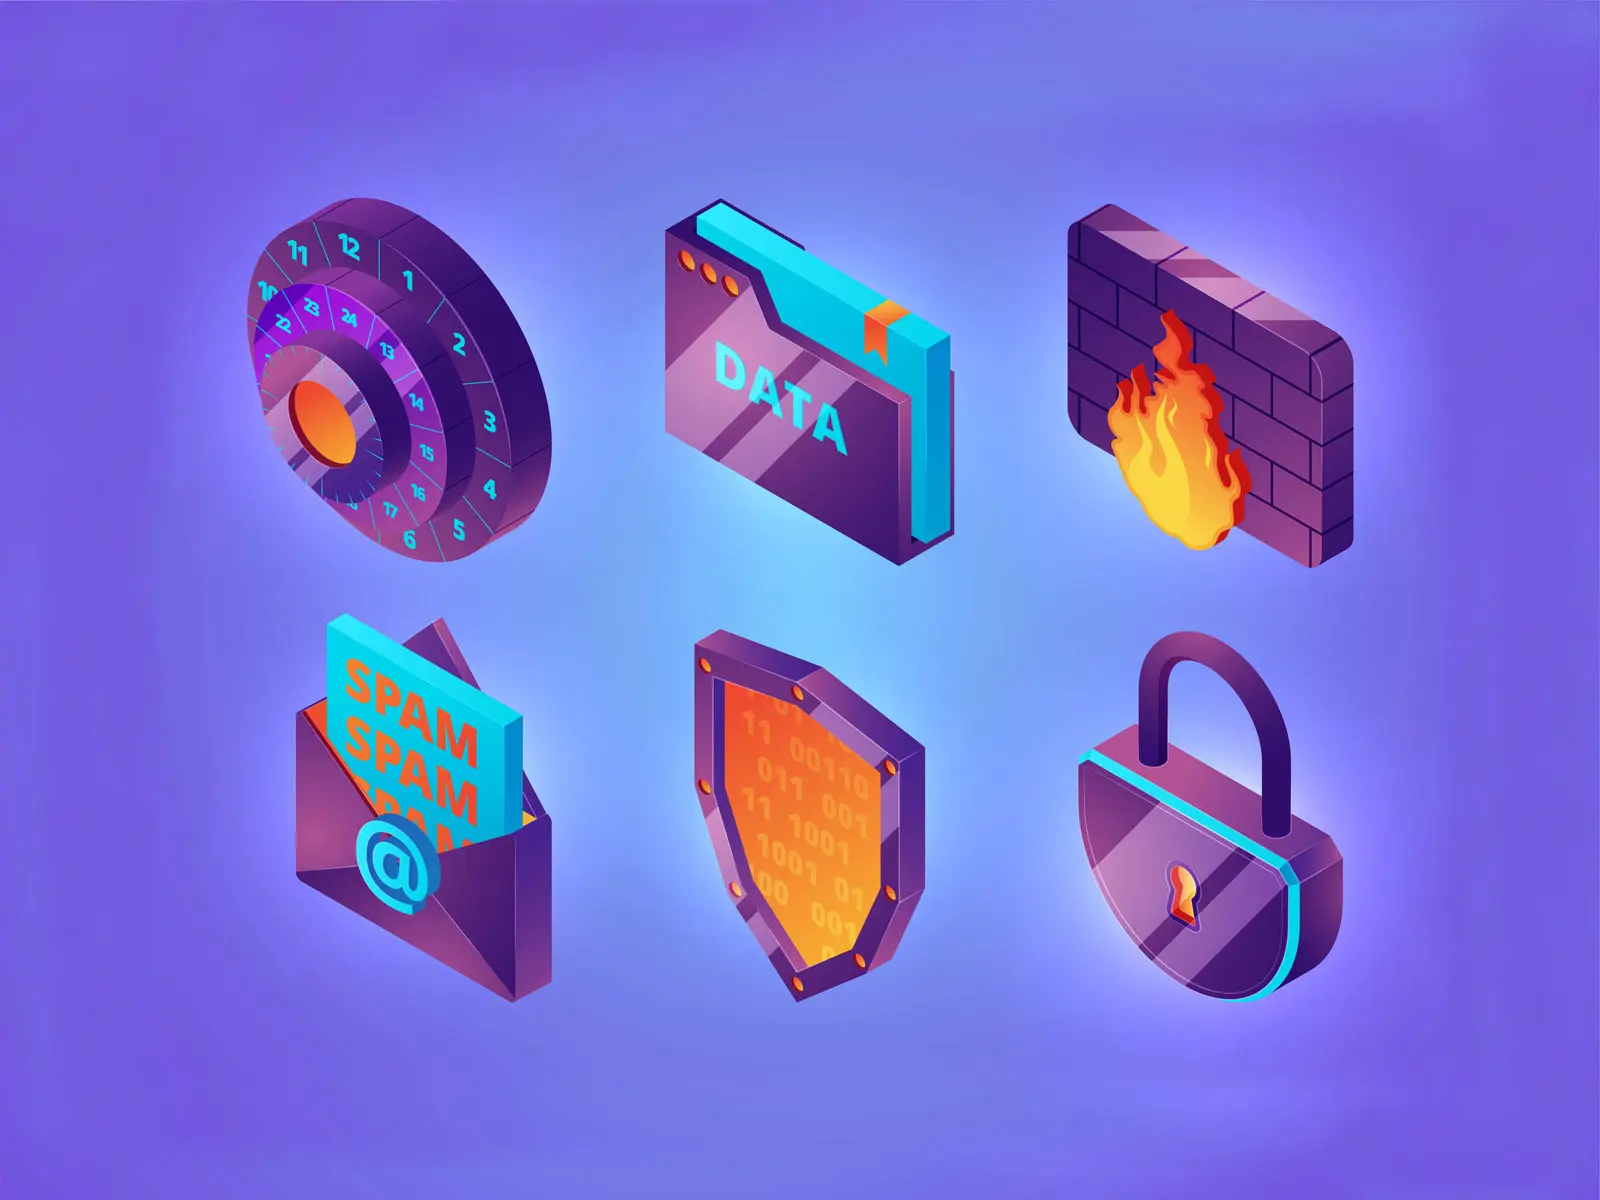 Graphic representations of different cybersecurity techniques like passwords, encryption, firewalls and more.